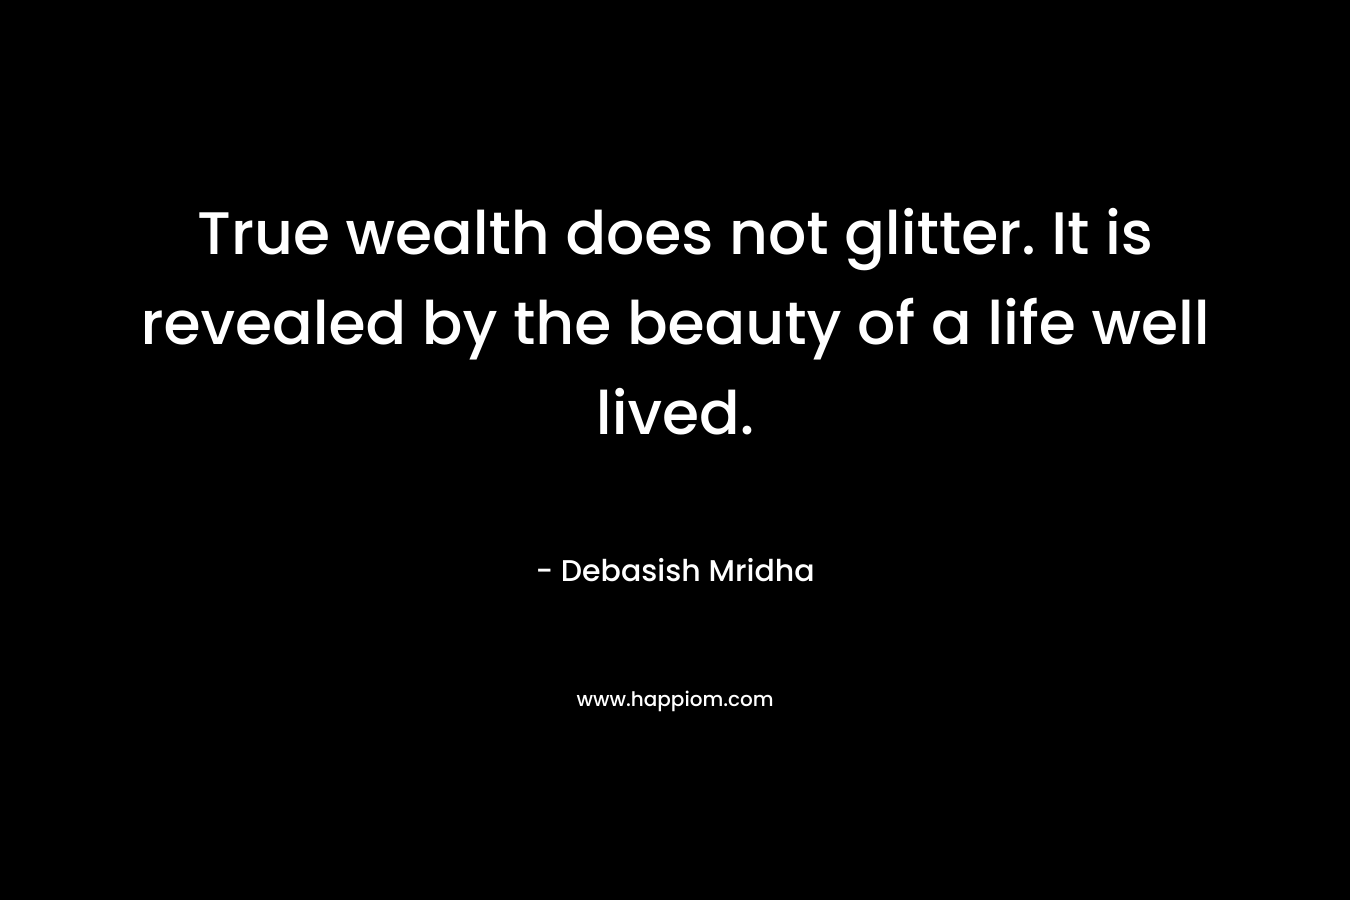 True wealth does not glitter. It is revealed by the beauty of a life well lived.